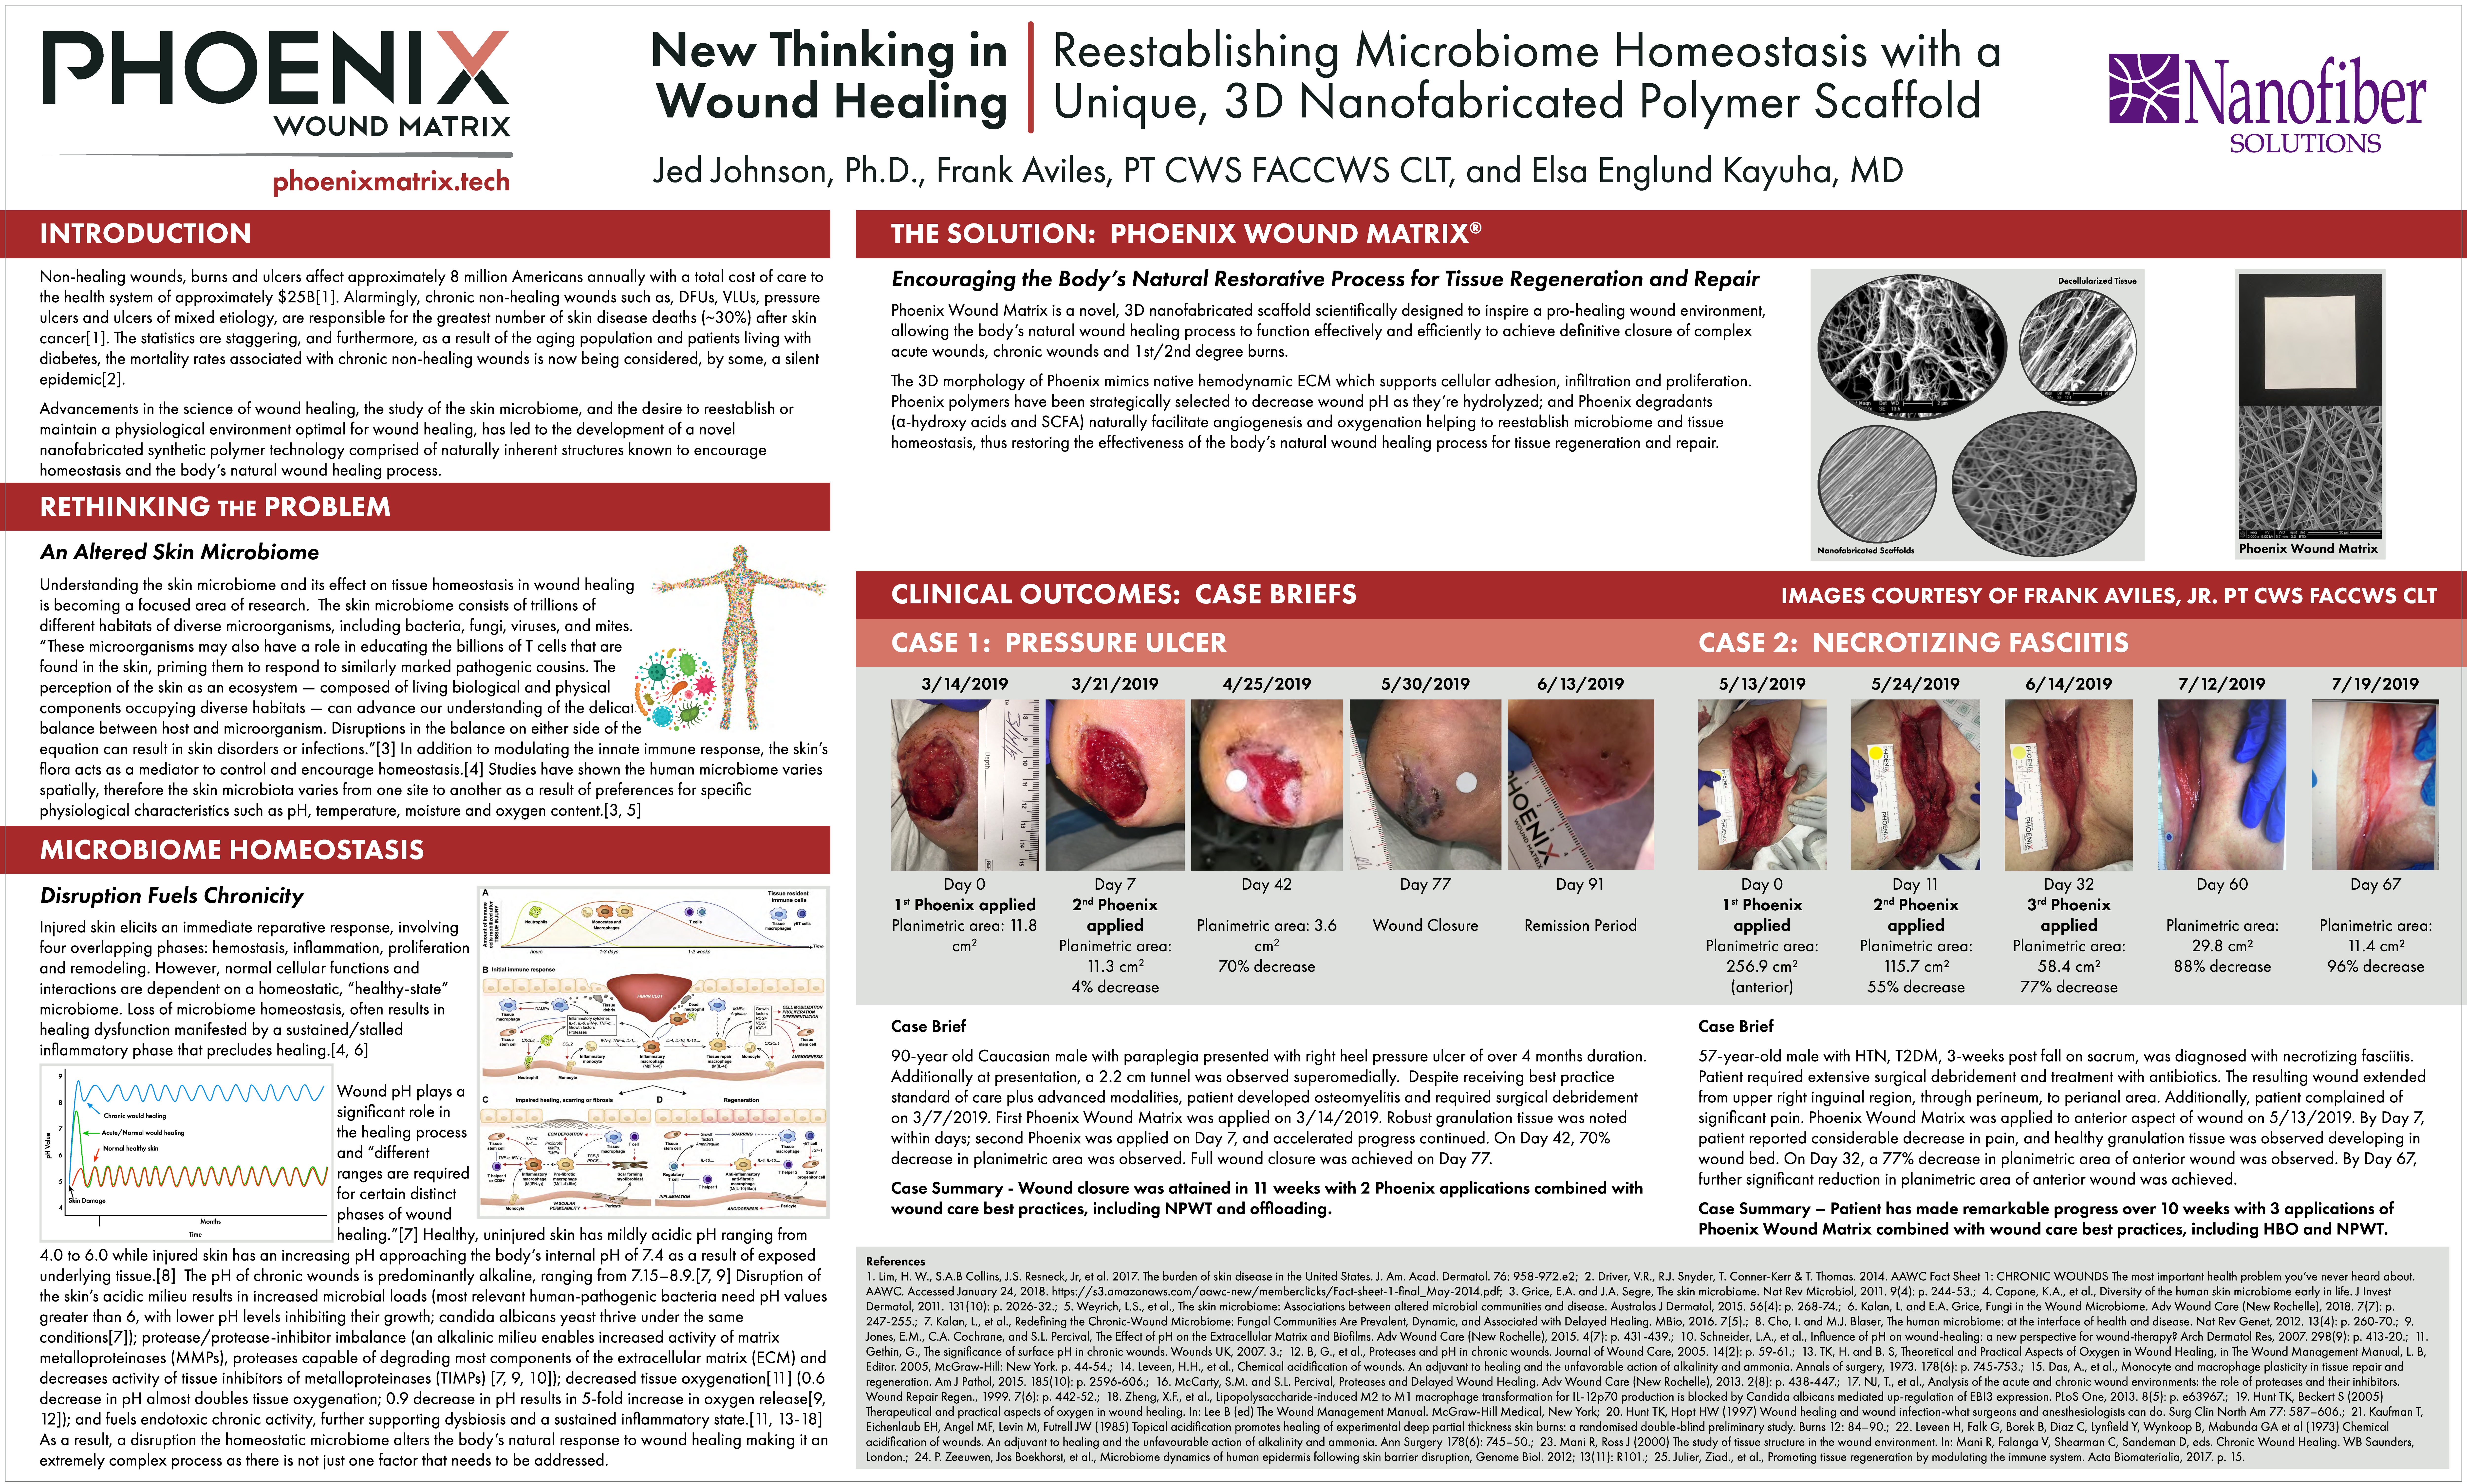 New Thinking in Wound Healing Reestablishing Microbiome Homeostasis poster presented at MHSRS